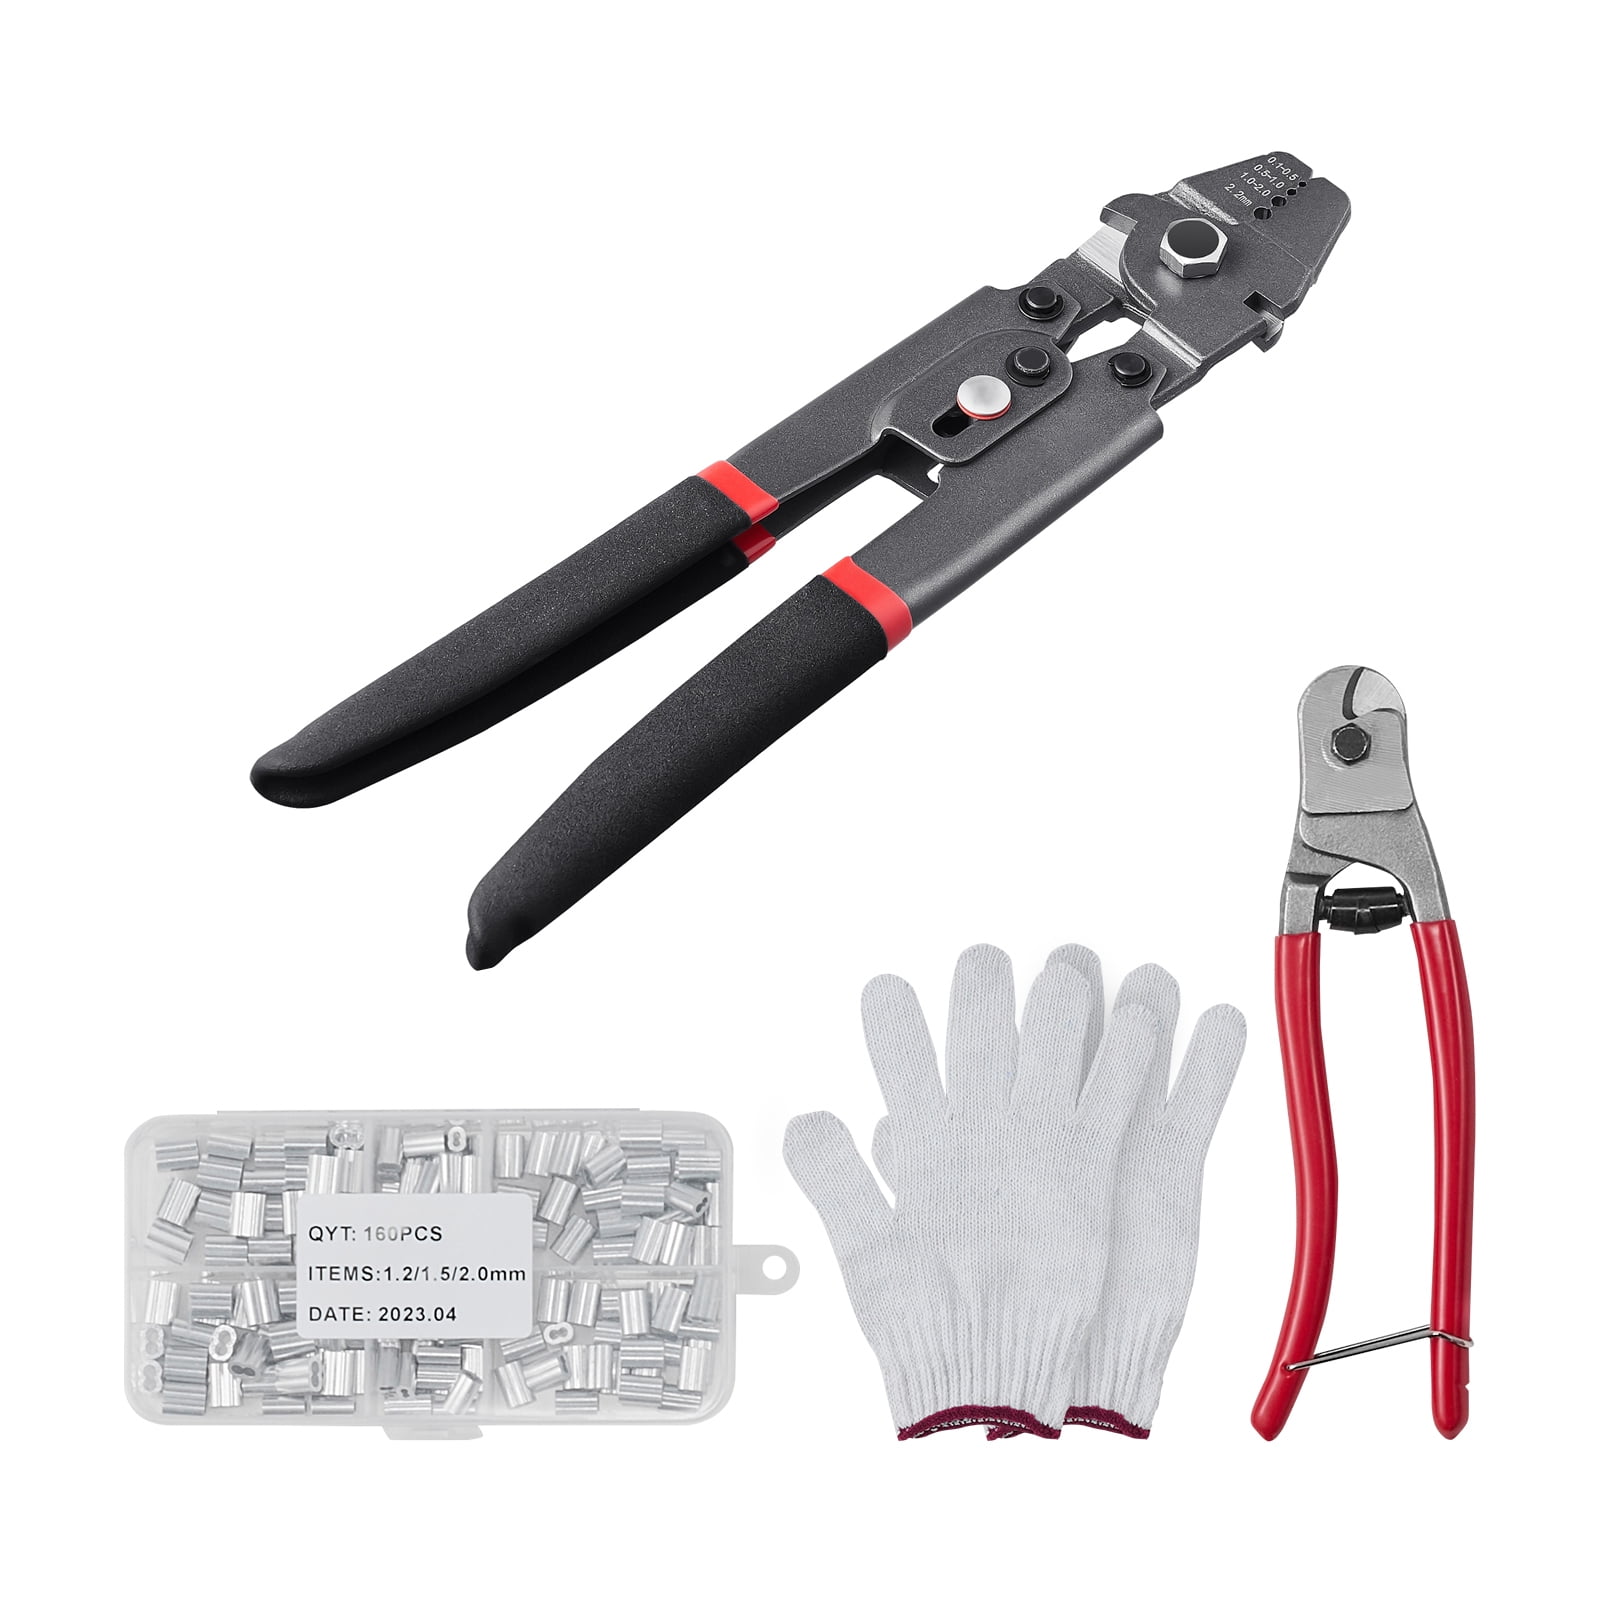 SKYSHALO Crimping Tool, Up To 2.2mm Wire Rope Crimping Tool, 1/64 - 3/32  Crimping Loop Sleeve Kit with a Cable Cutter and 160pcs Aluminum Buckles,  Teflon Coating Anti-Rust Fishing Crimping Tool 